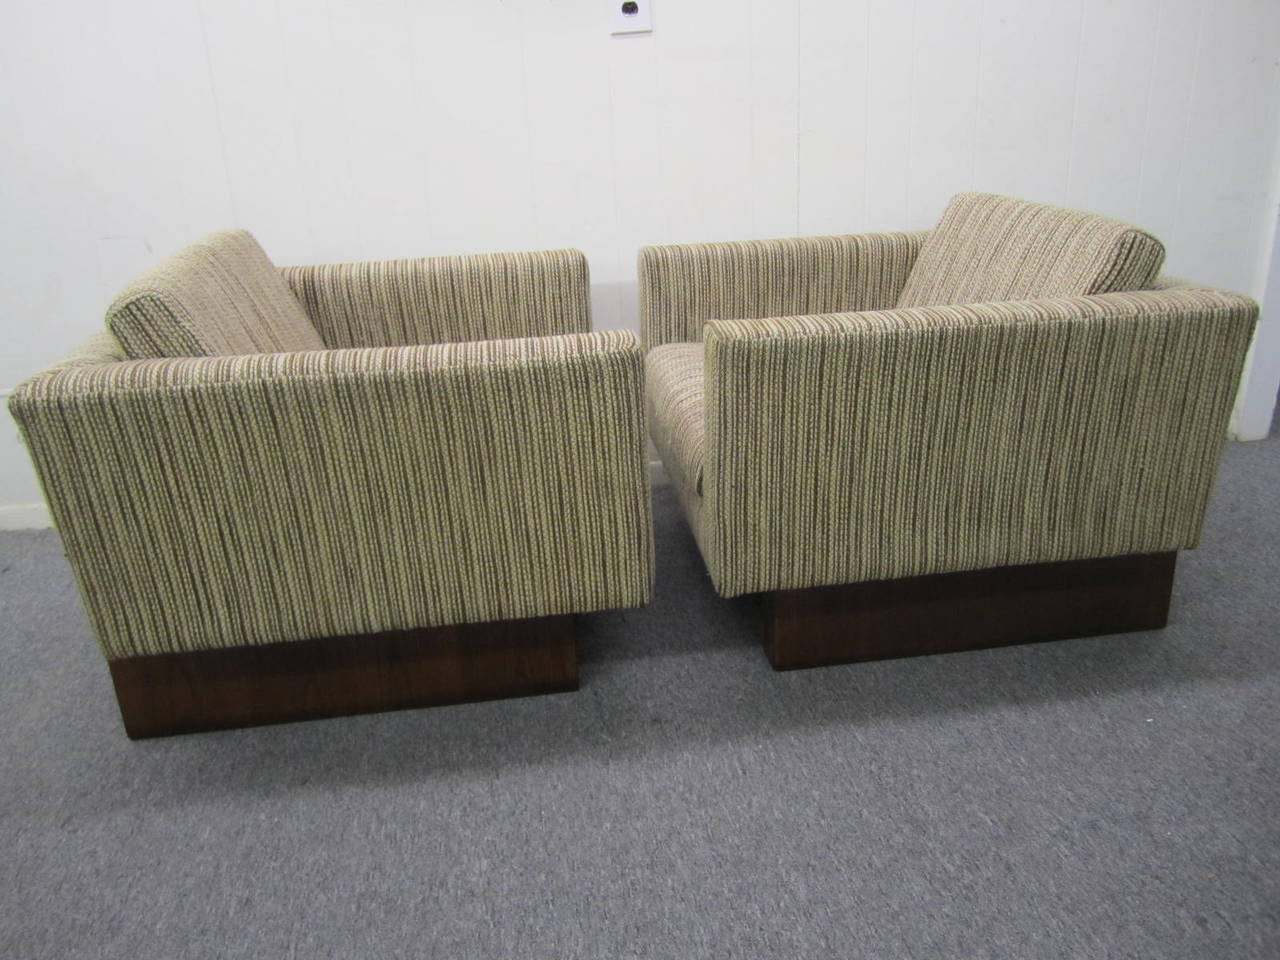 Rare Pair of Signed Harvey Probber Cube Lounge Chairs, Mid-Century Modern In Good Condition For Sale In Pemberton, NJ